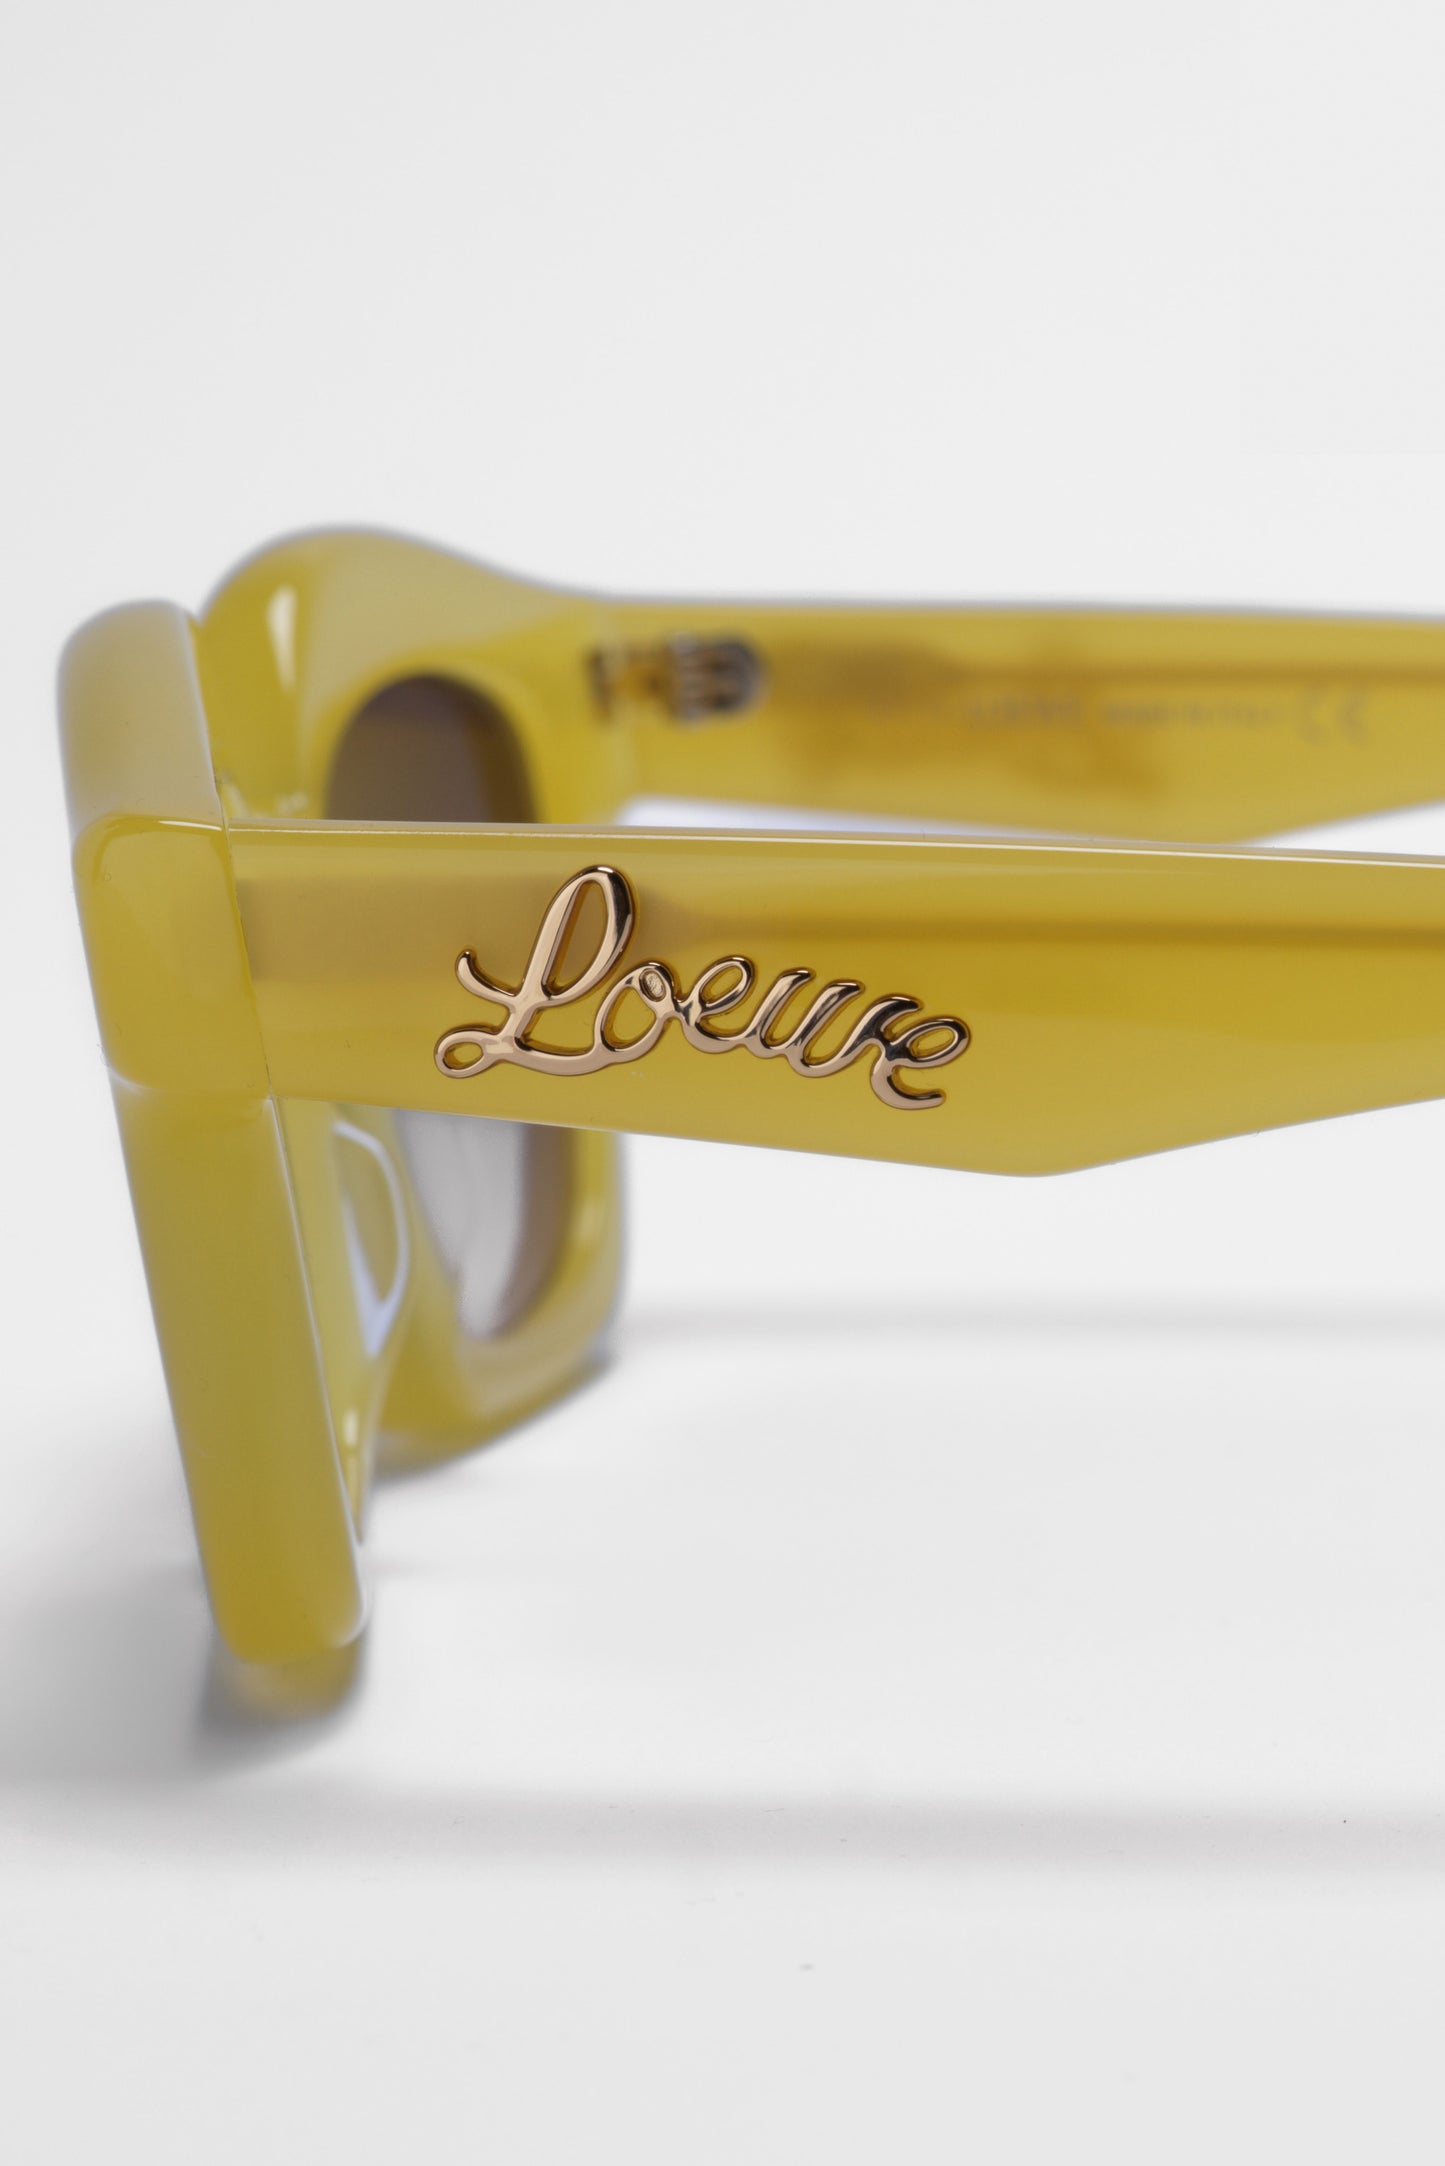 Loewe Arched Yellow Sunglasses